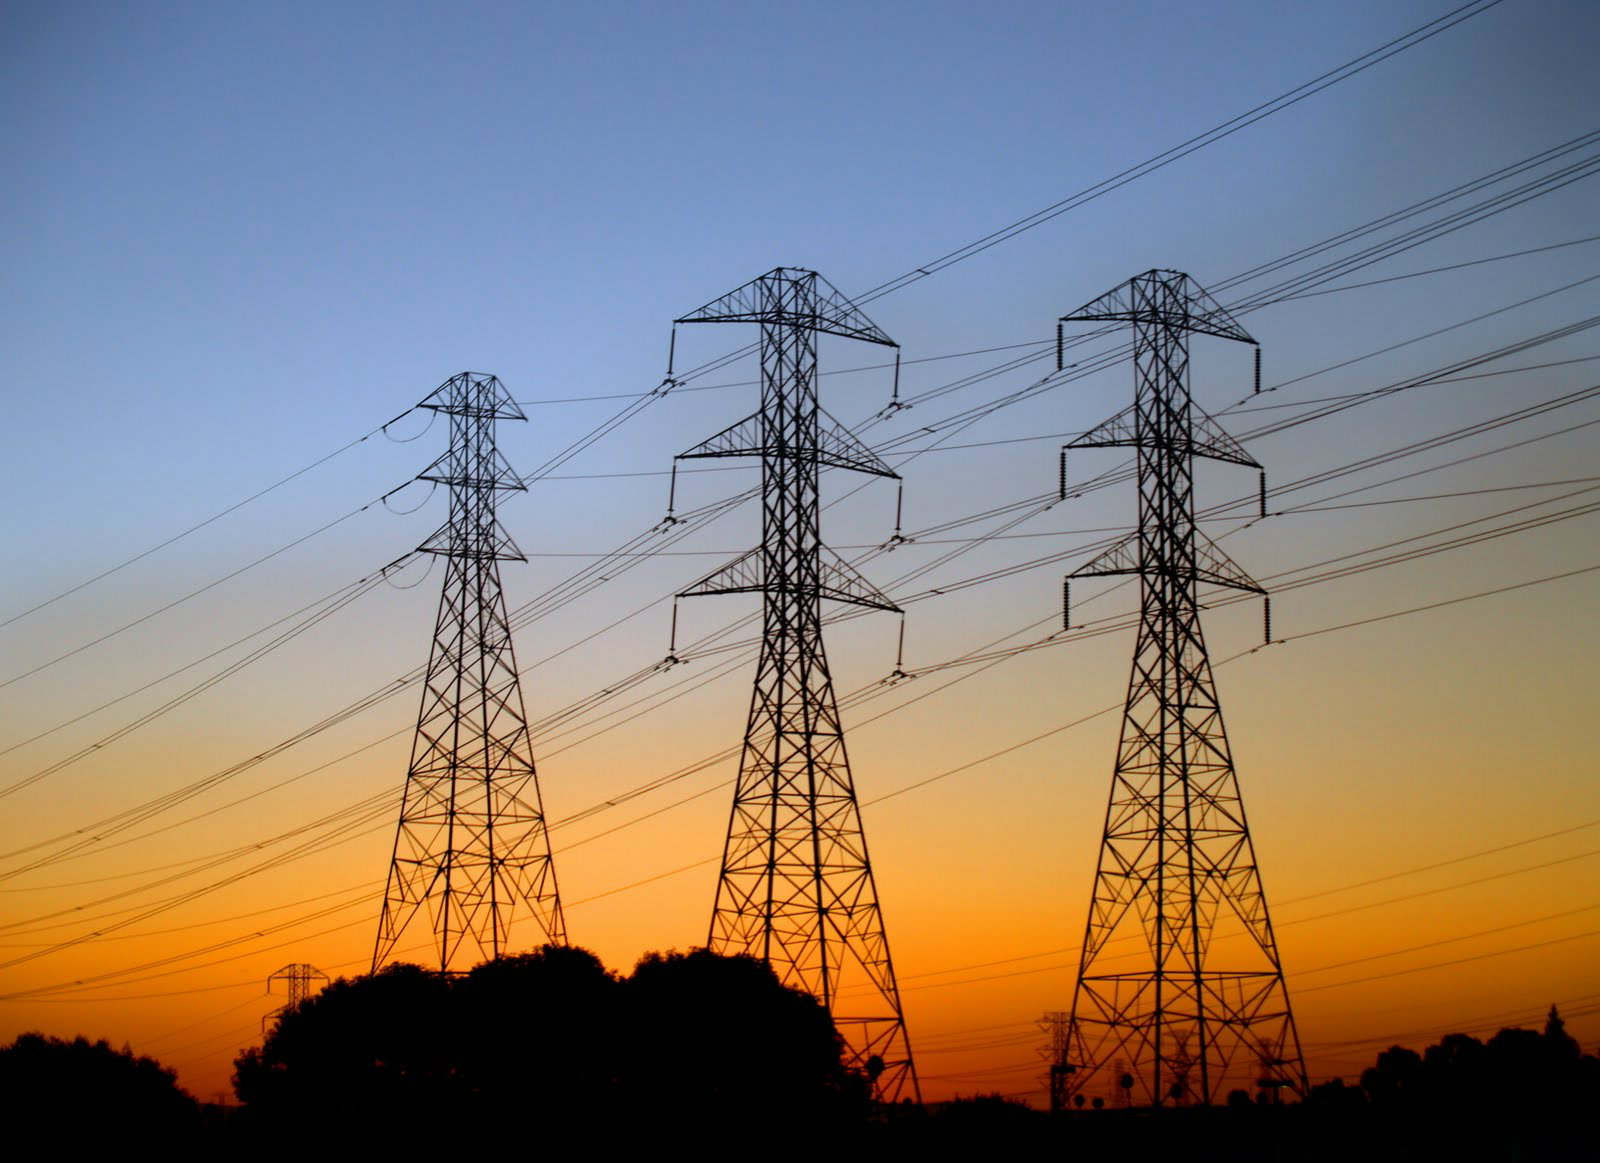 From Sunday, June 19, the cost of electricity in Spain and Portugal will drop